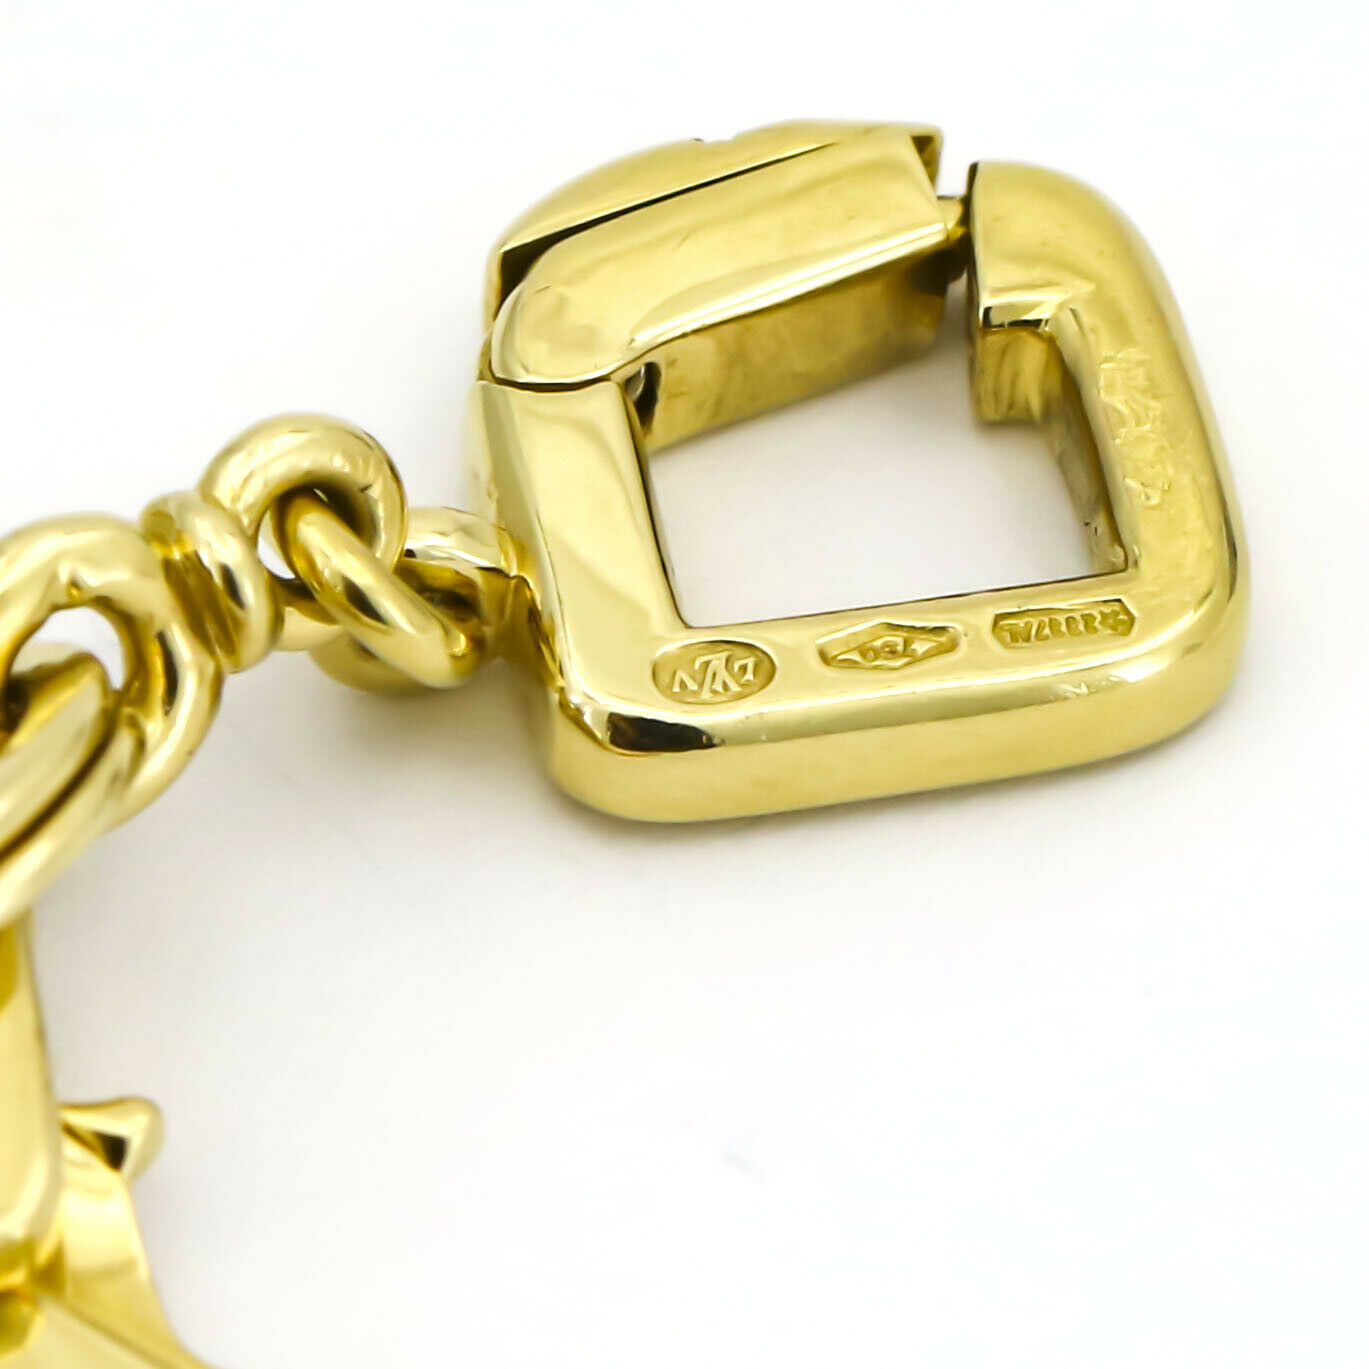 Louis Vuitton Padlock and Keys Charm Bracelet in 18k Yellow Gold with Box - Precious Metal ...